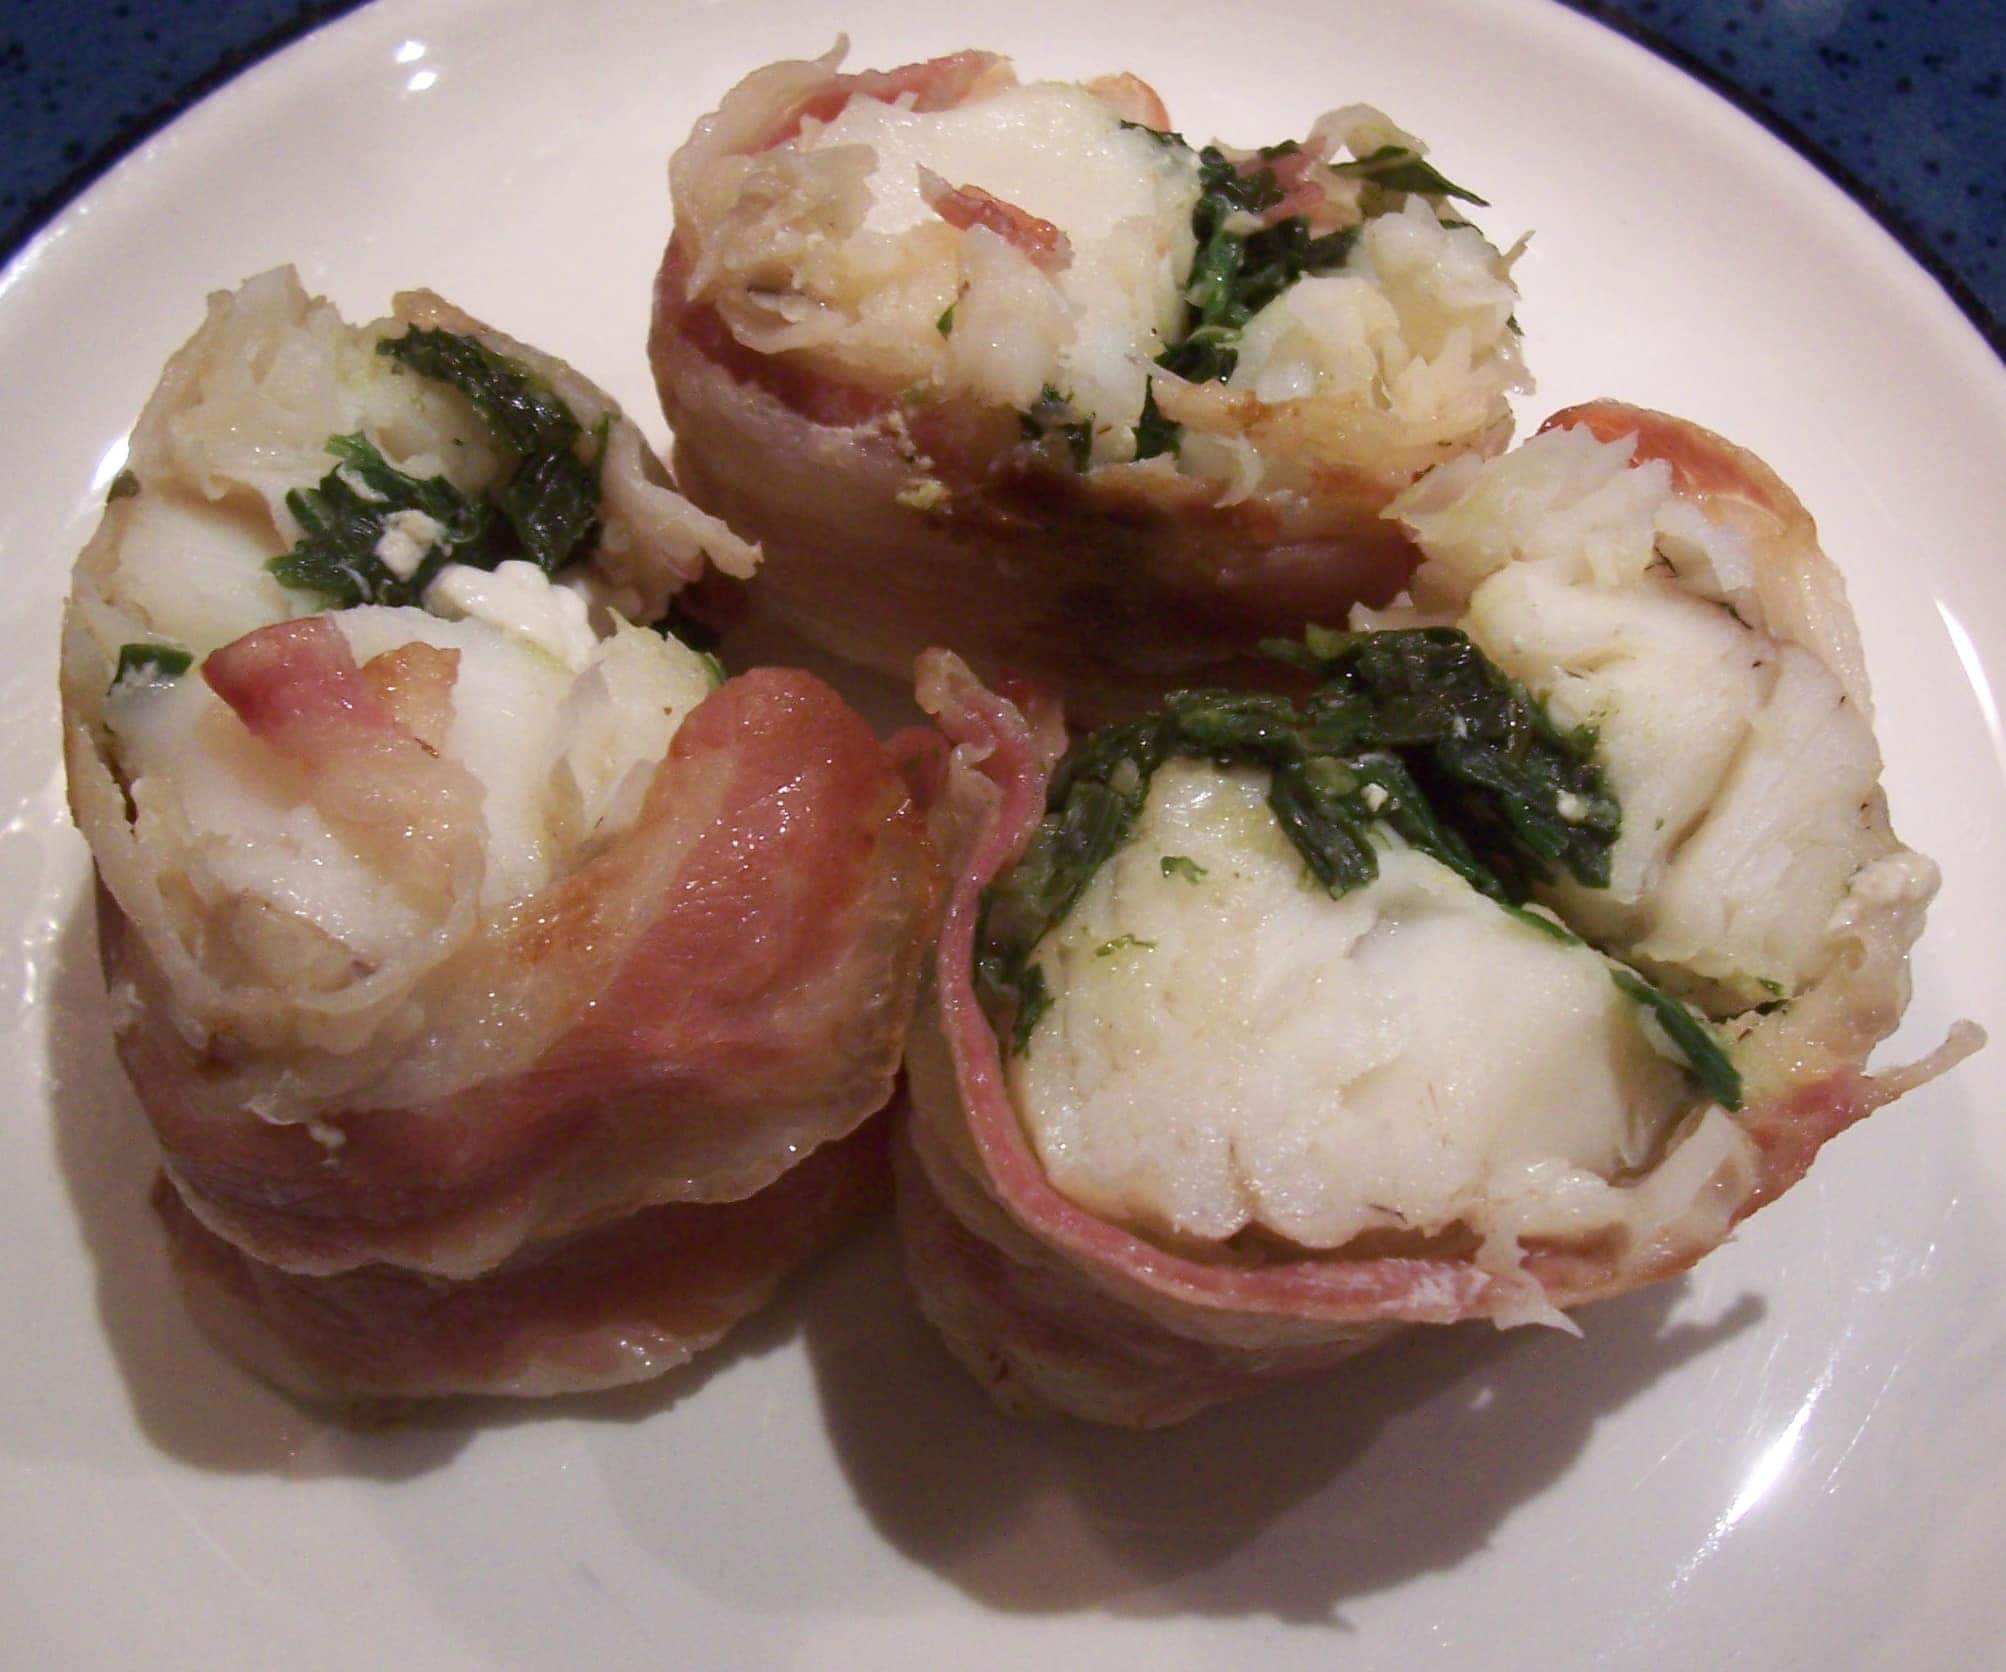 Monkfish tail warped in pancetta with a fresh herb filling